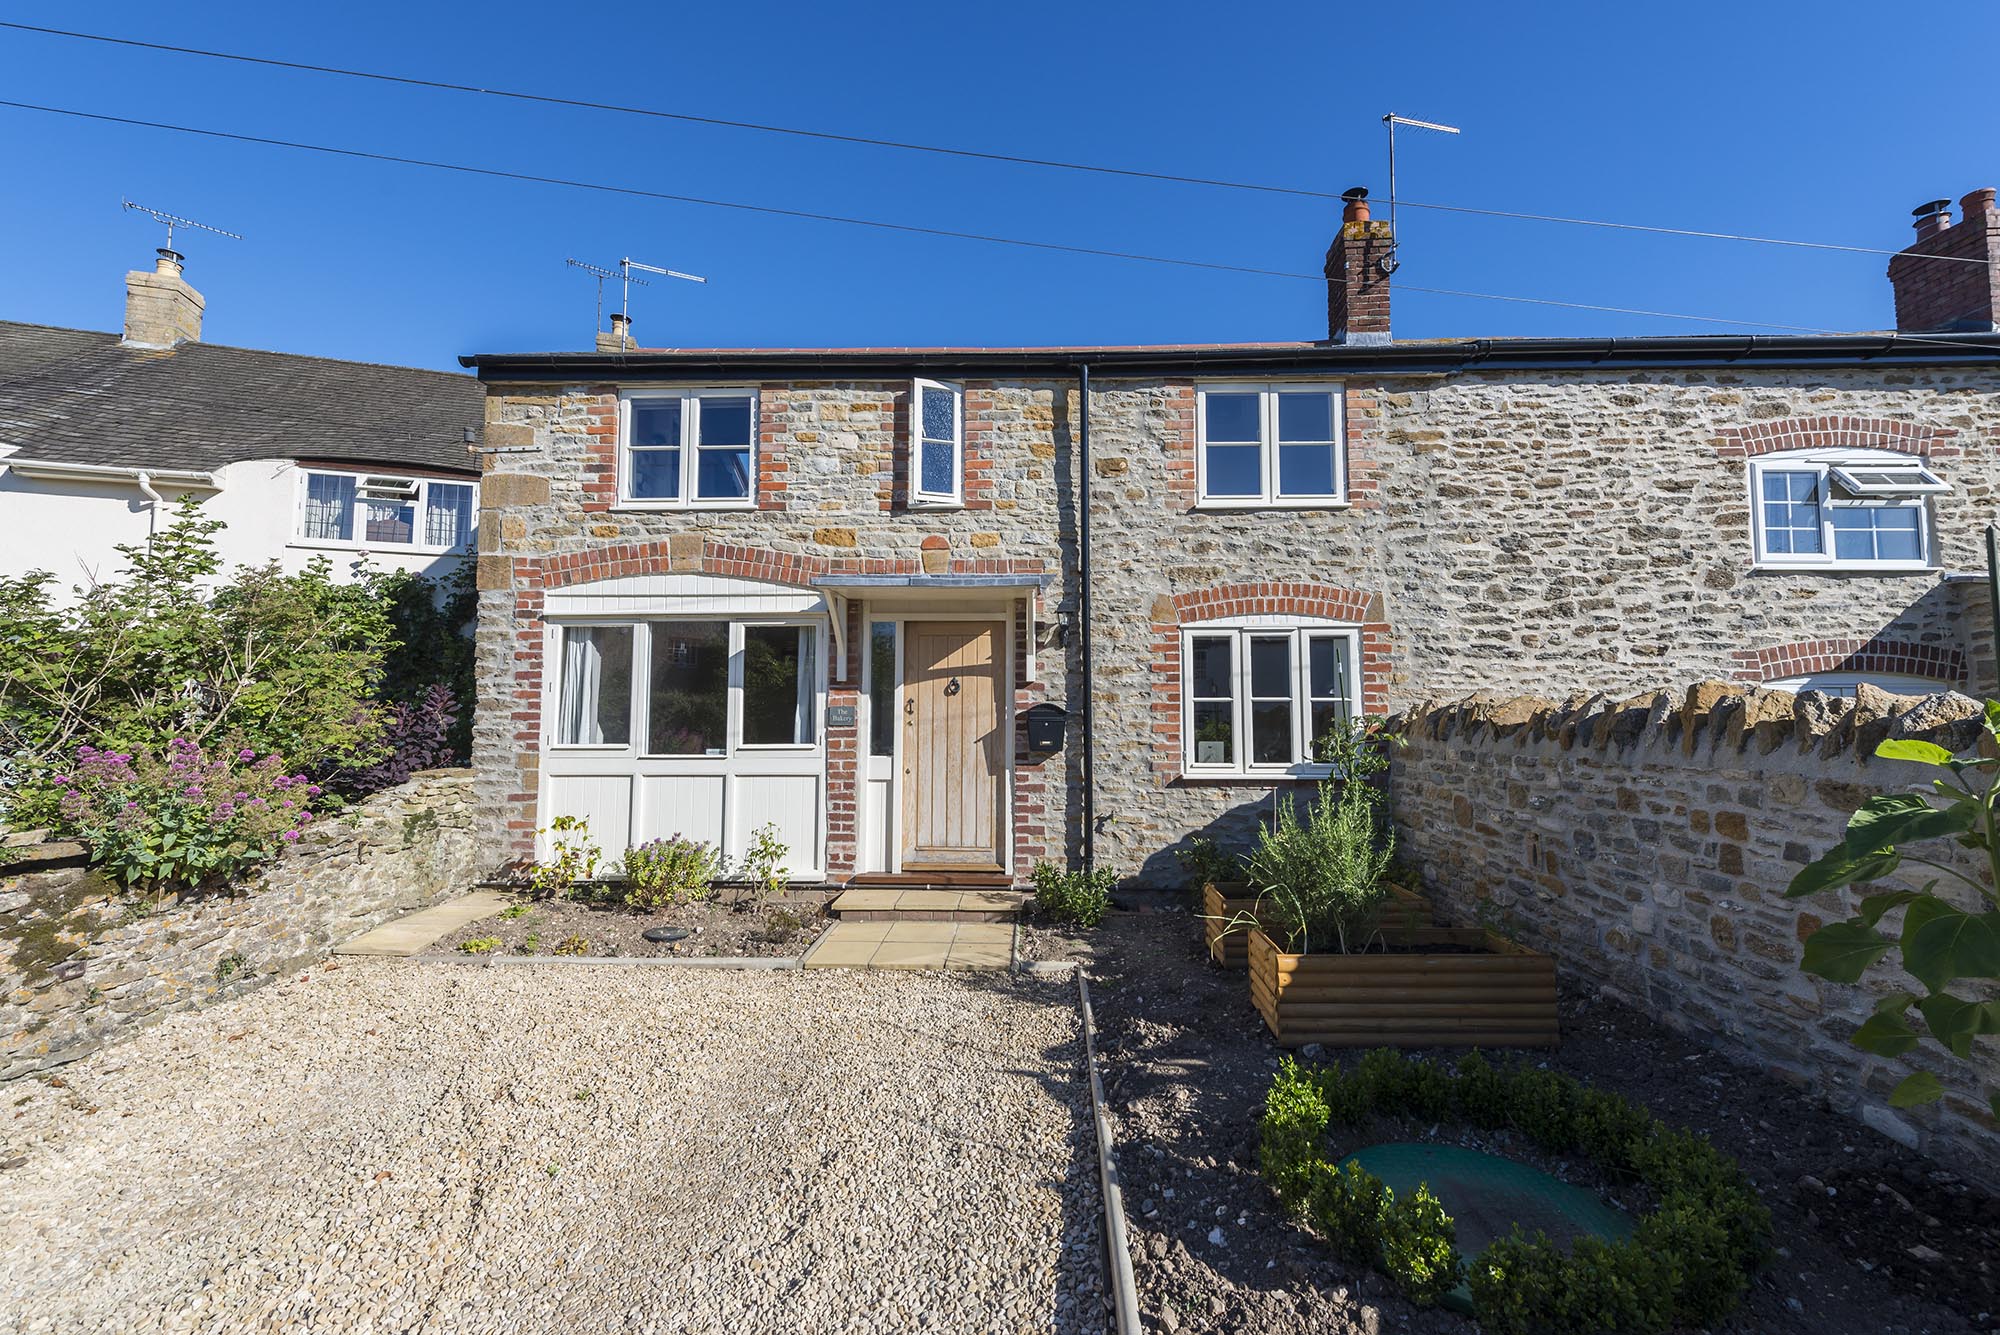 The Bakery, Halstock : Dreamy Dorset homes for sale